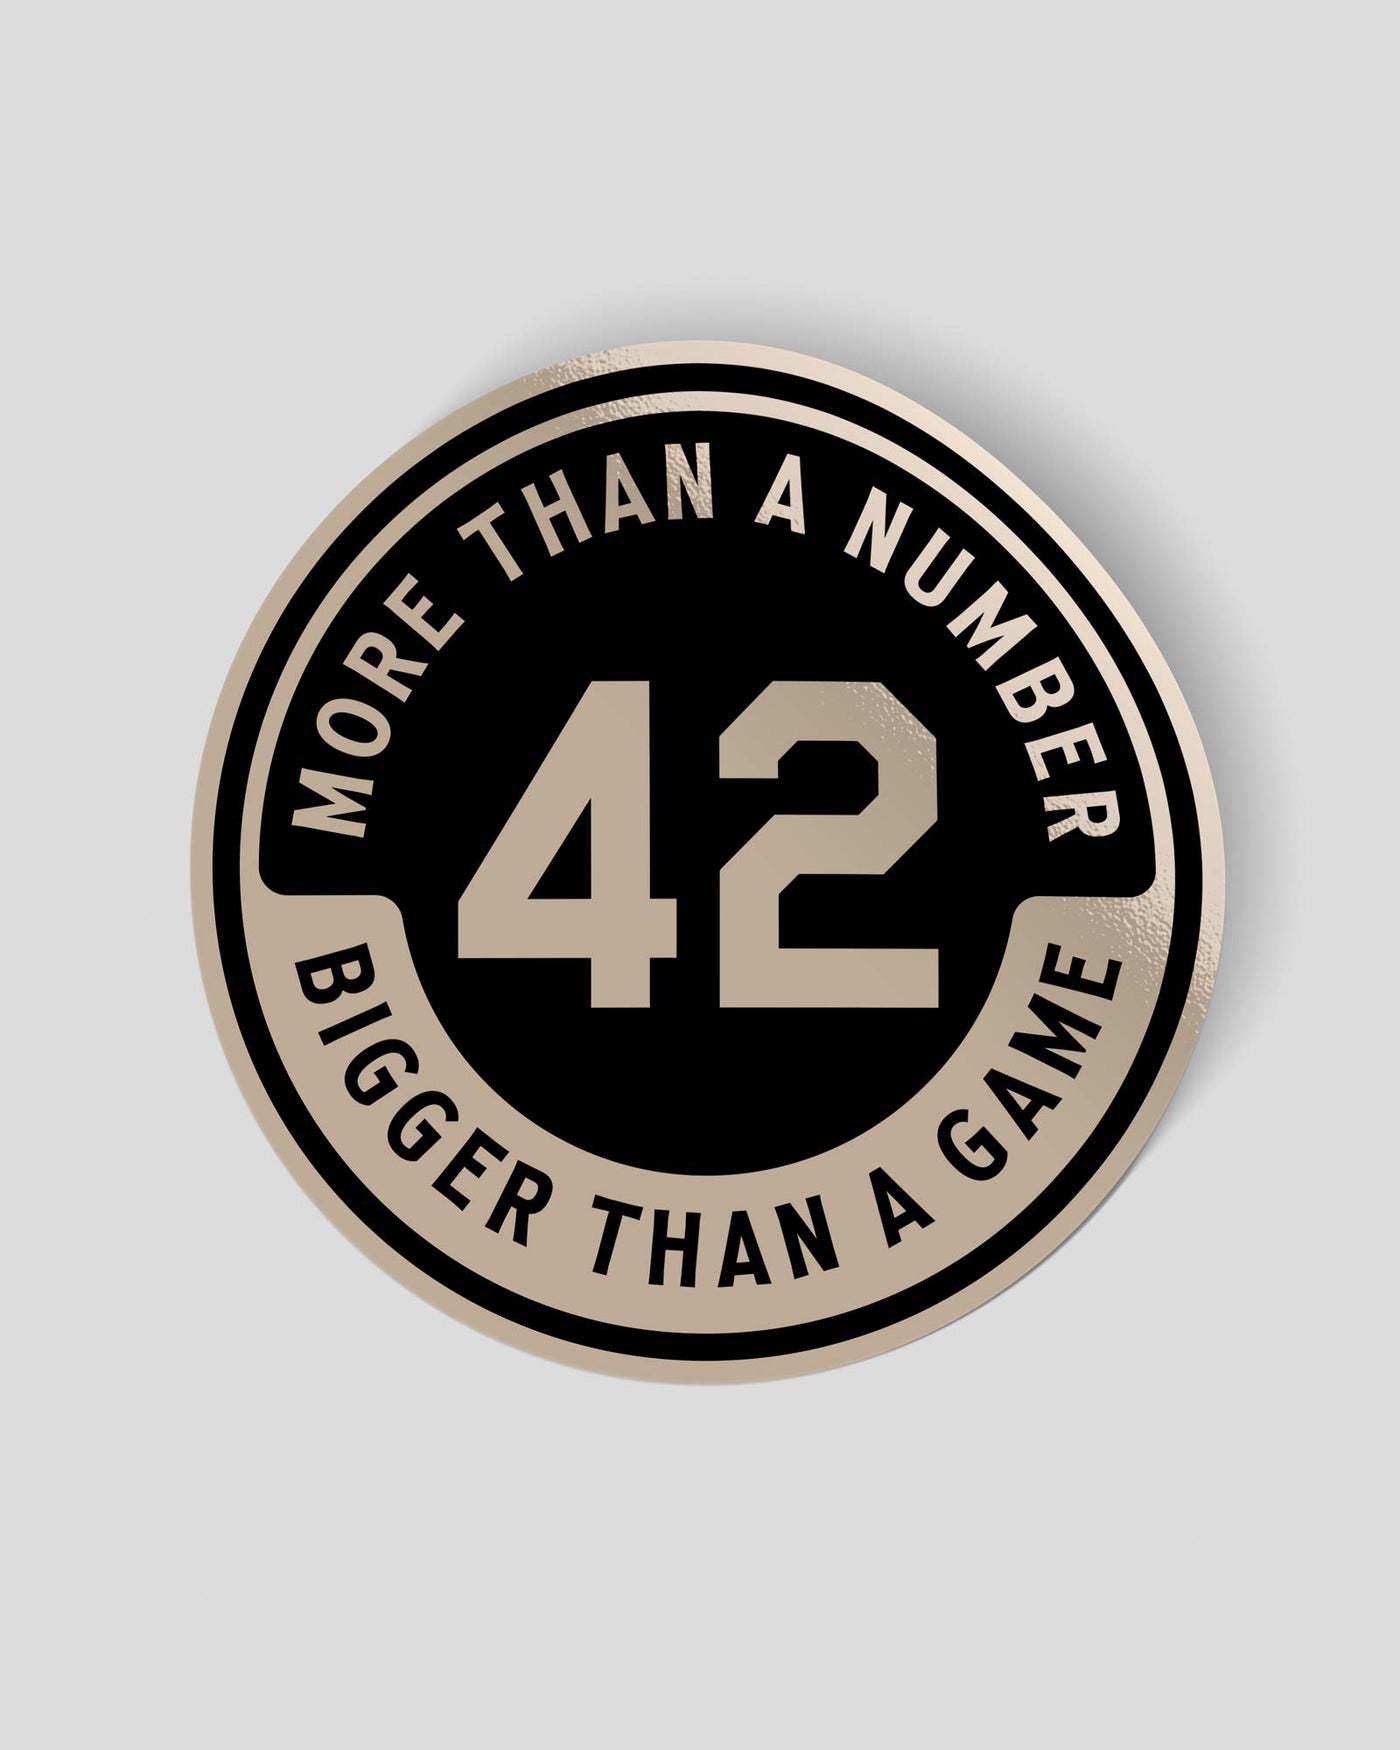 42: More Than a Number Helmet Decal